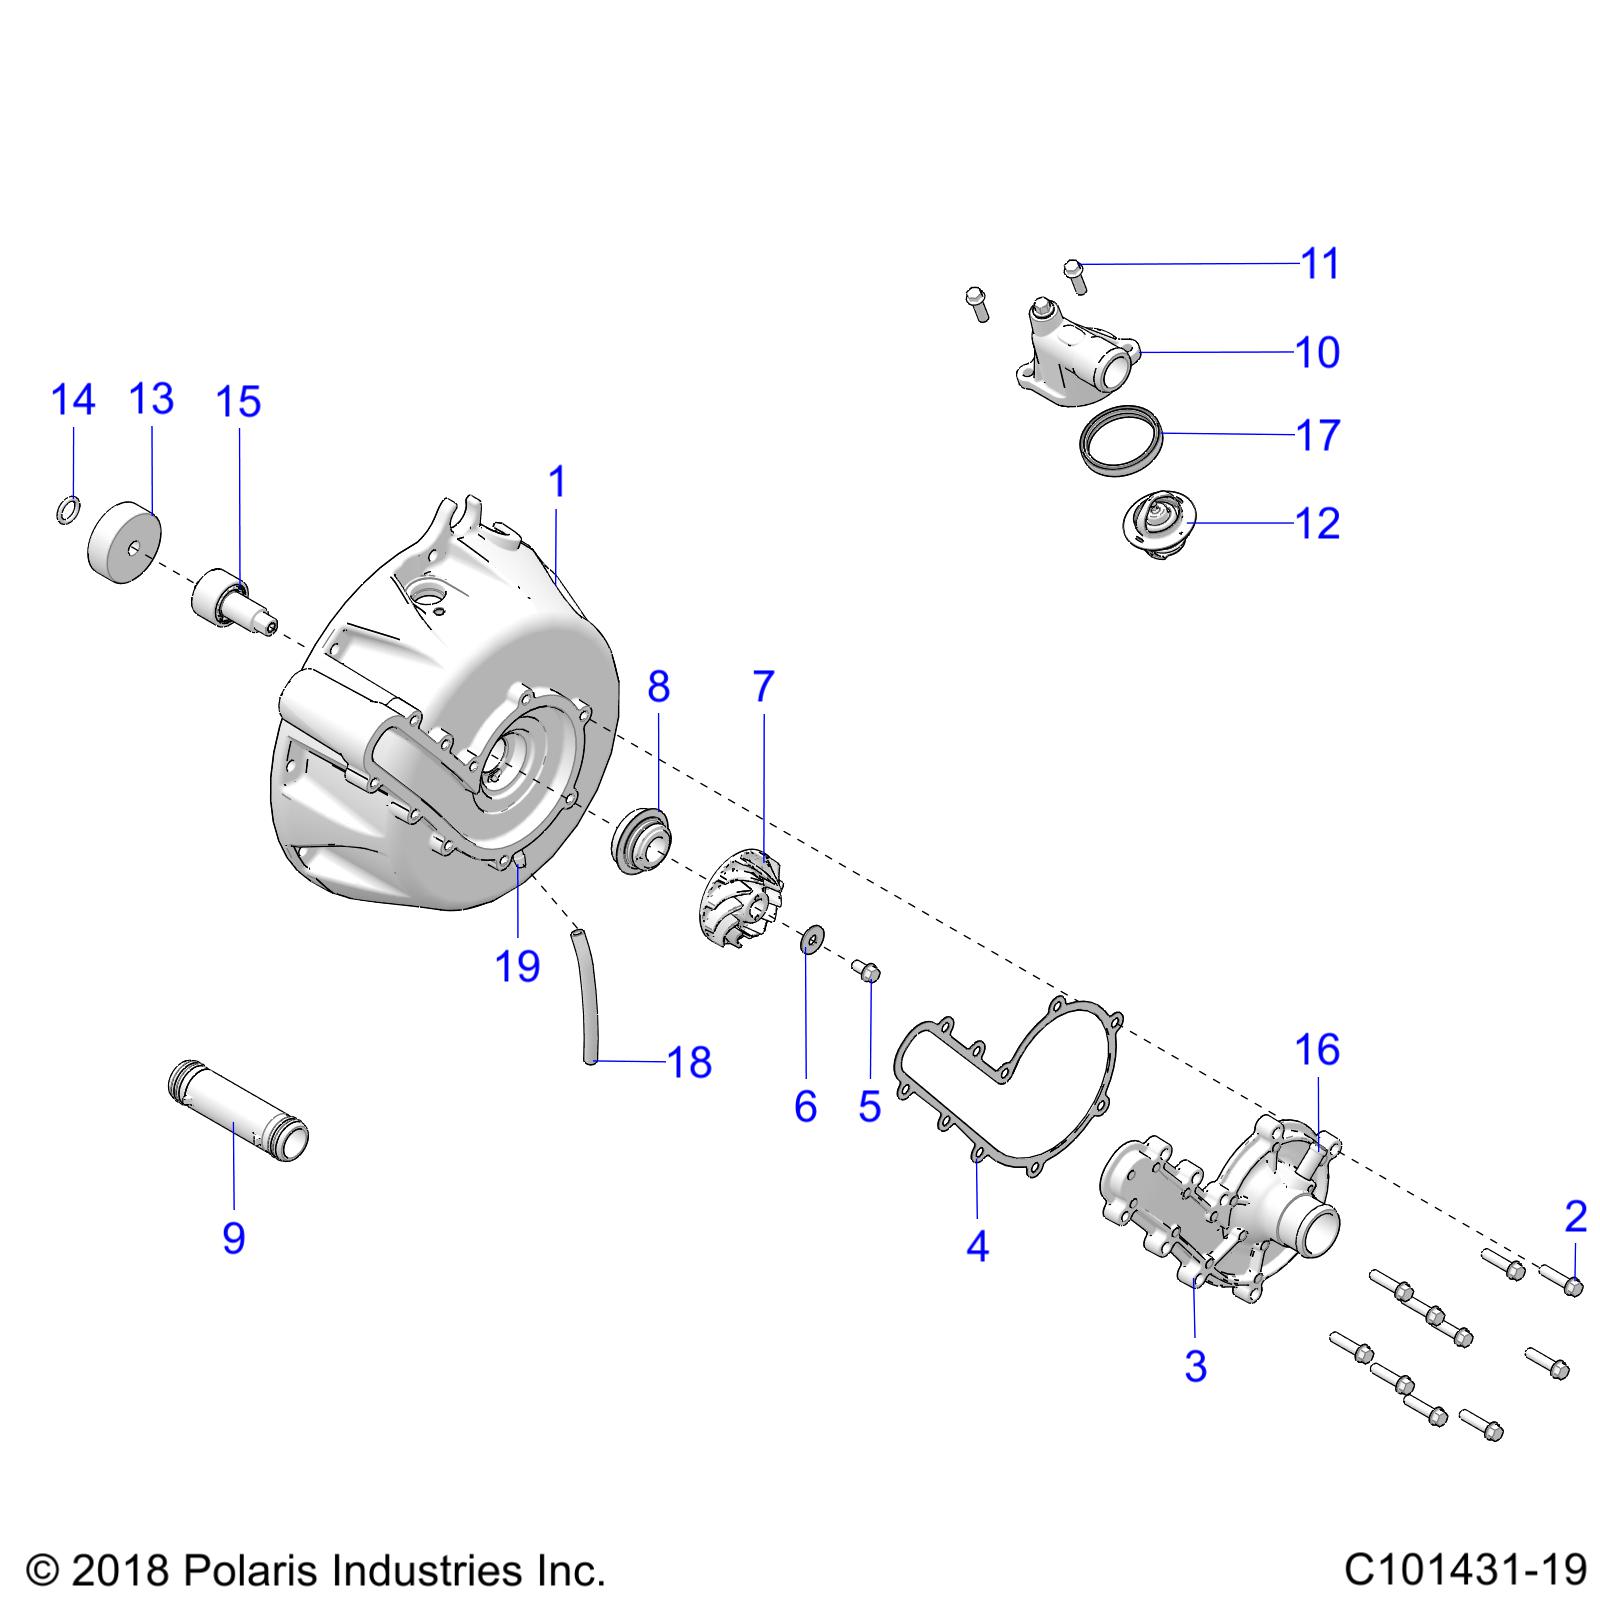 ENGINE, COOLING SYSTEM and WATER PUMP - A20SYE95KH (C101431-19)